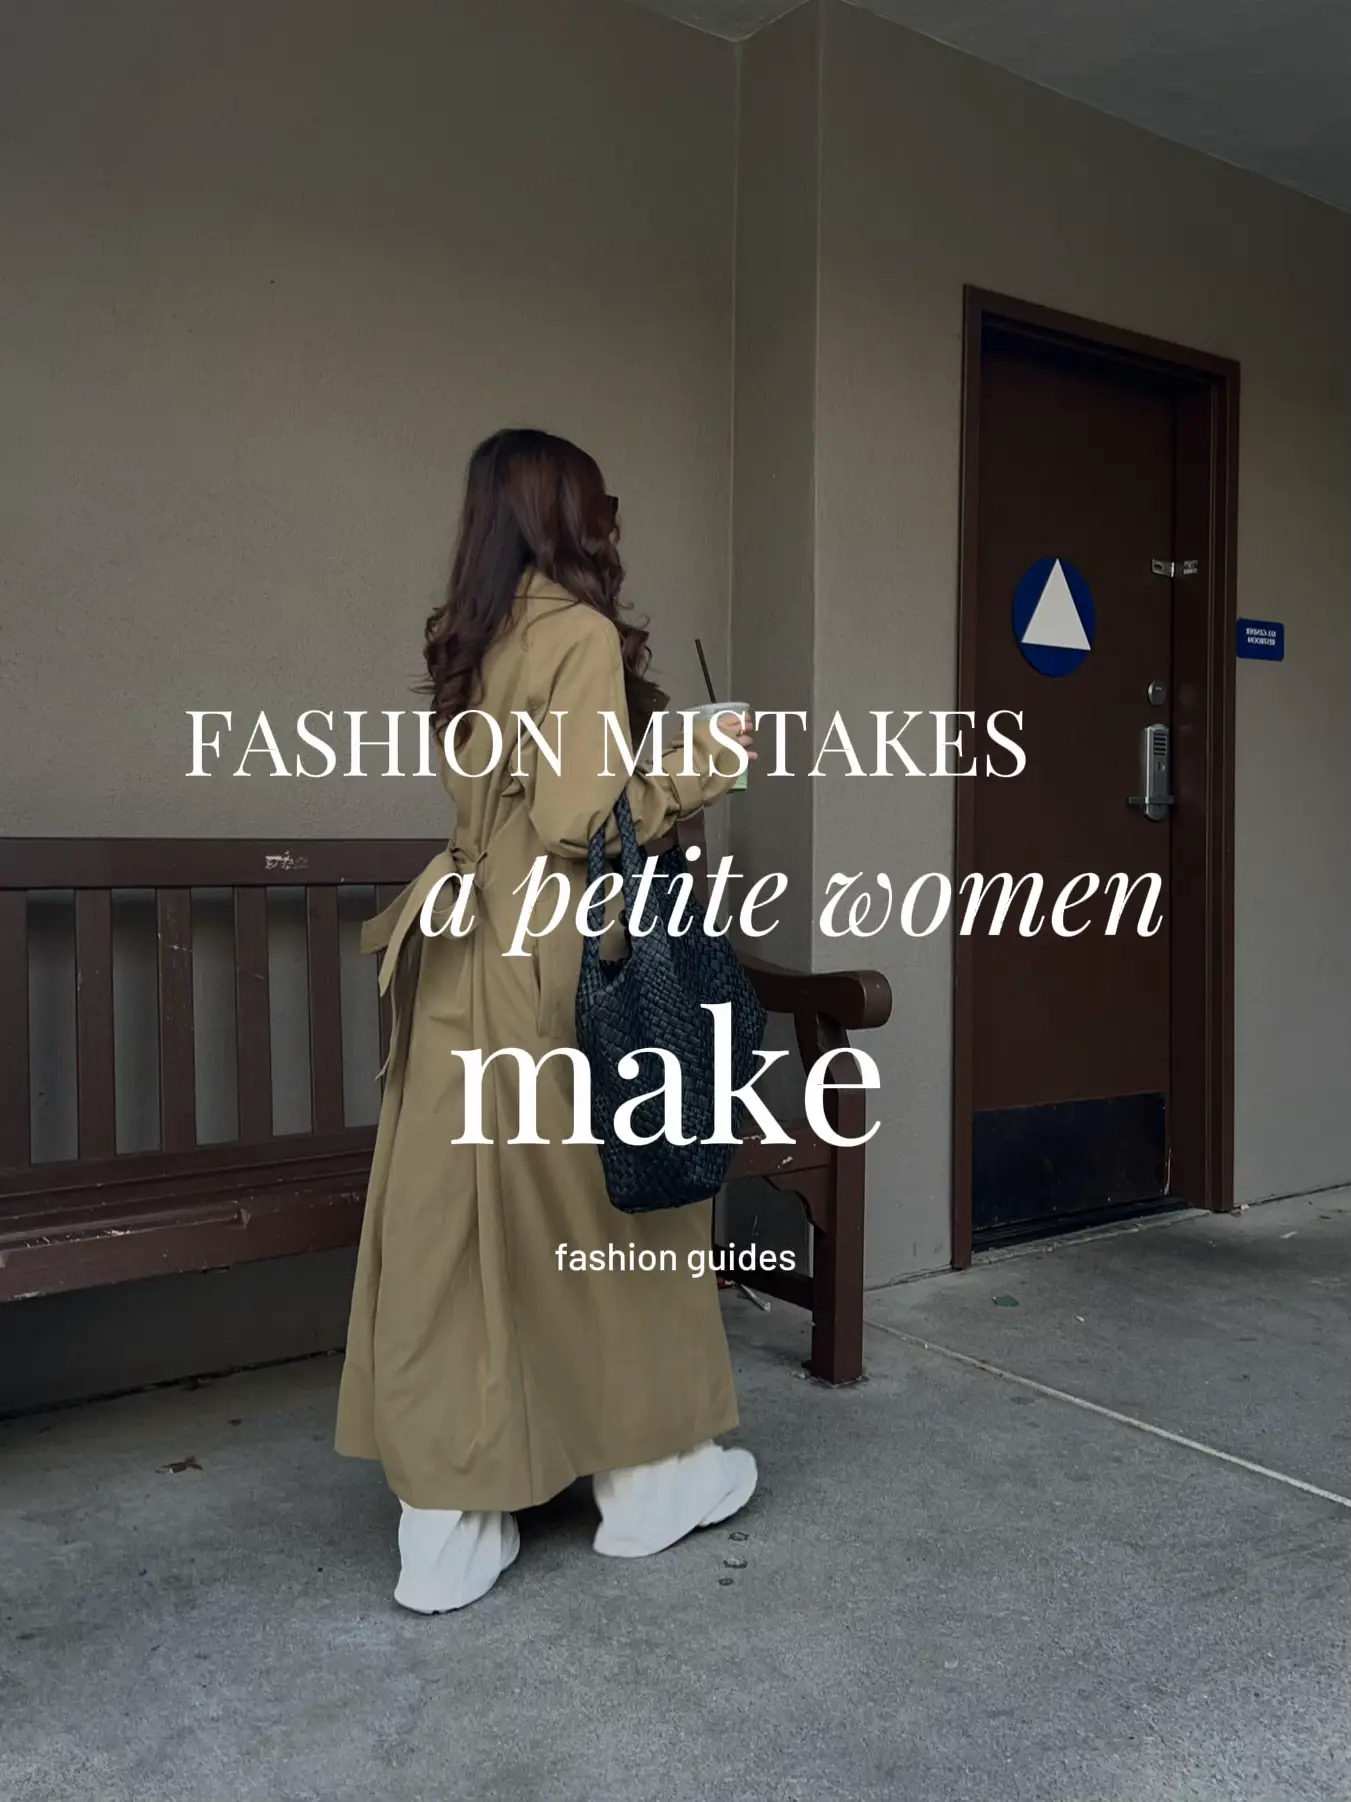 FASHION MISTAKES A PETITE WOMEN MAKE's images